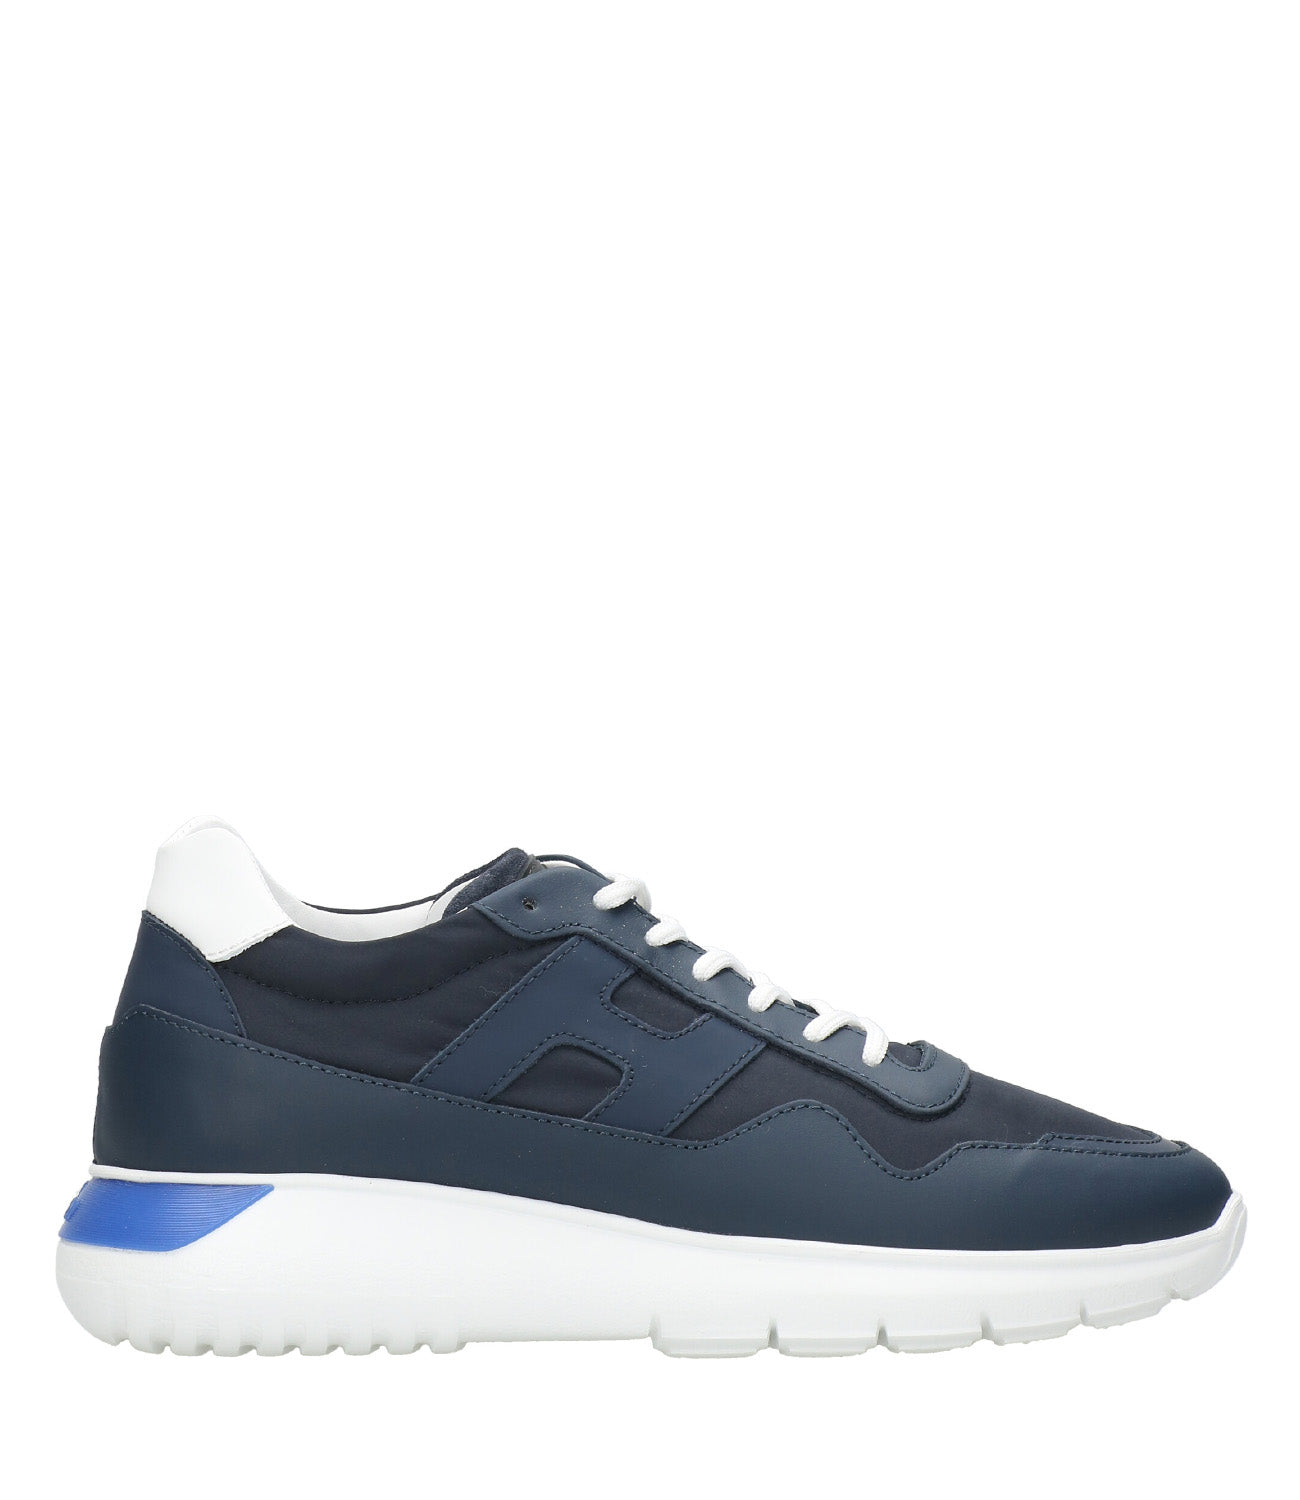 Hogan | Sneakers Interactive 3 Navy Blue and White